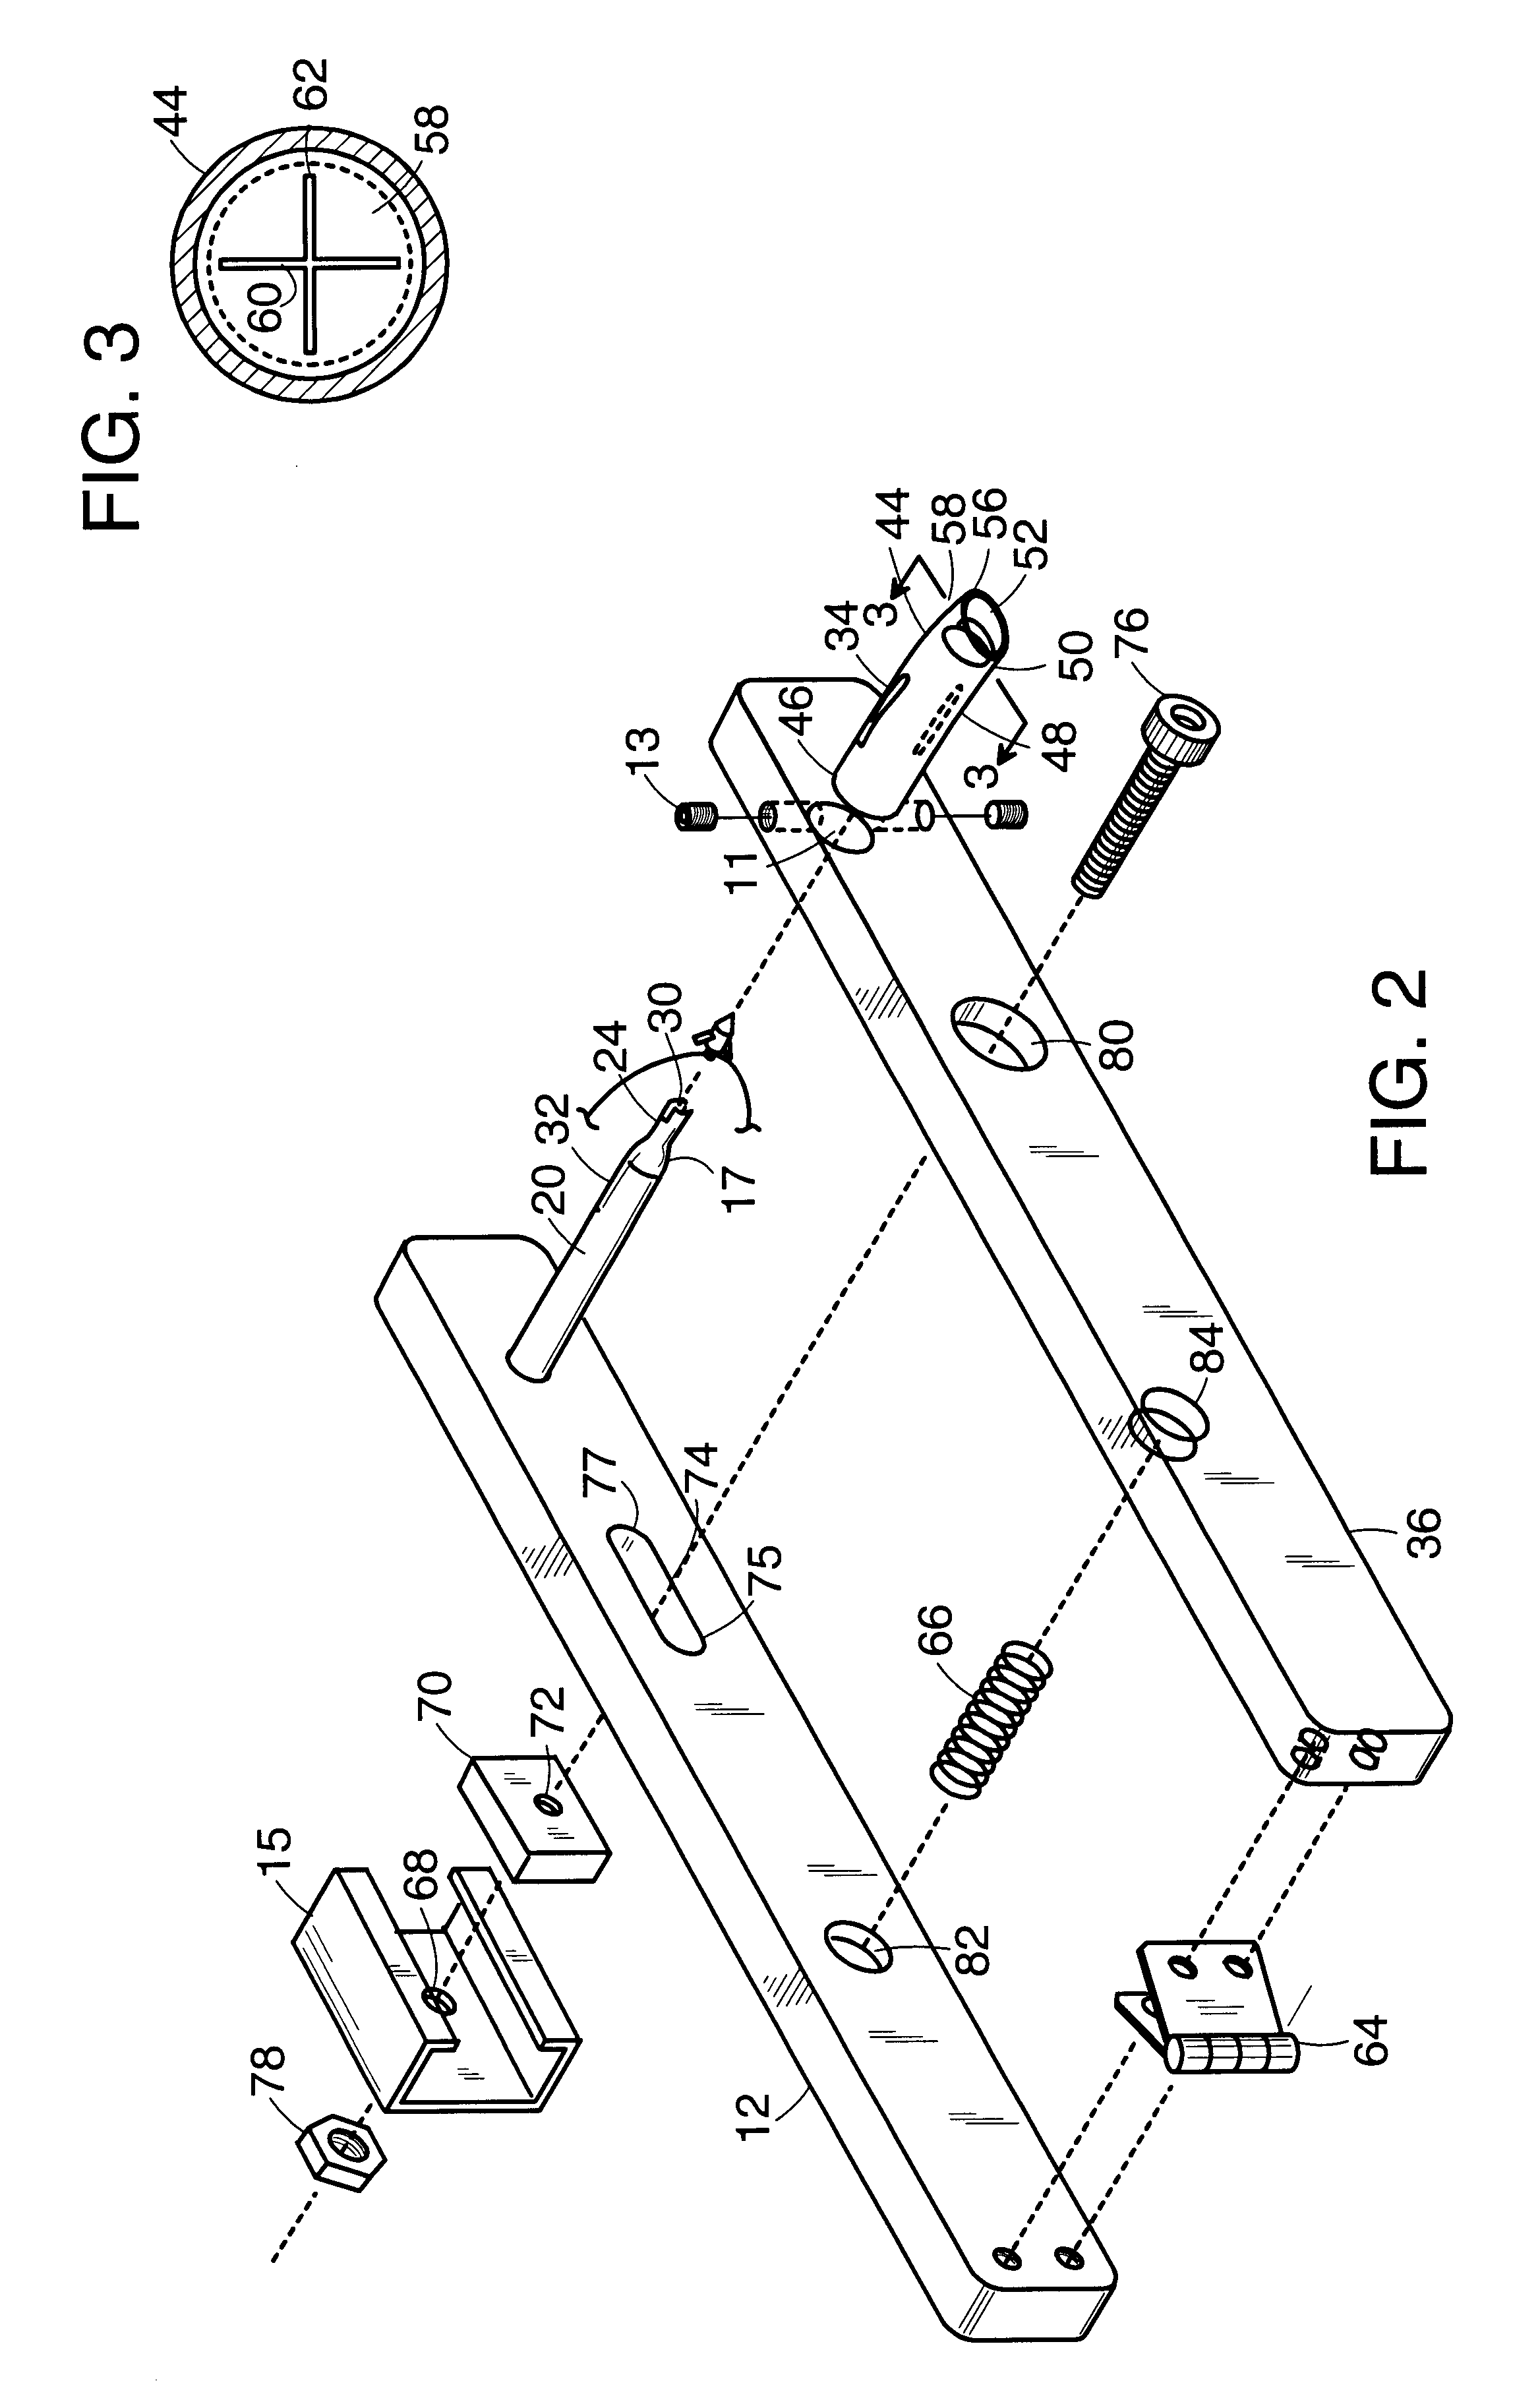 Protective sheath for transvaginal anchor implantation devices